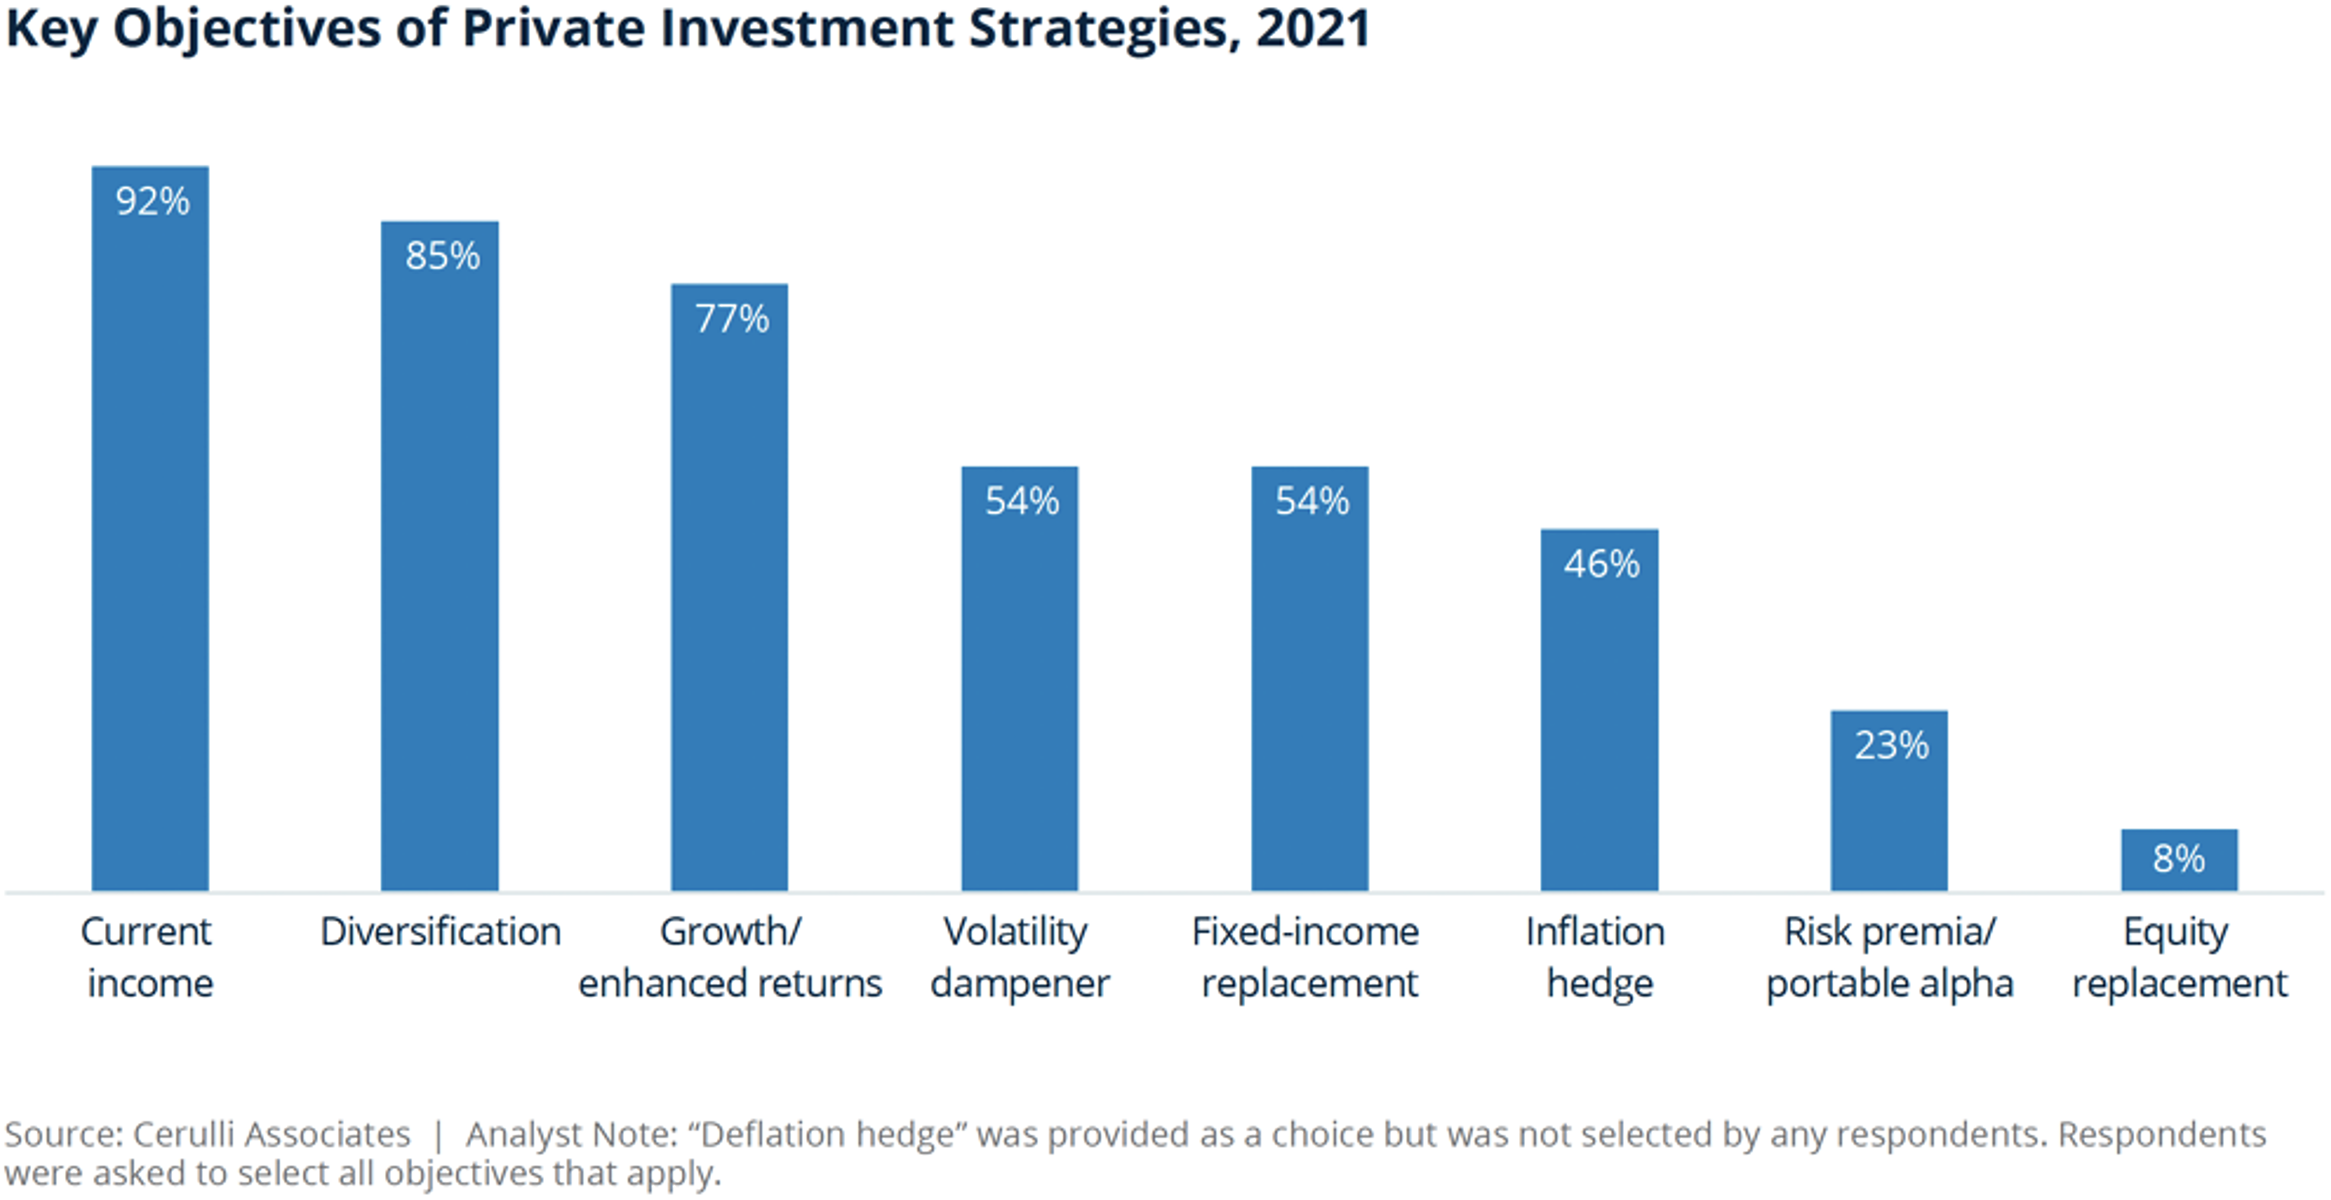 Key objectives of private investment strategies 2021